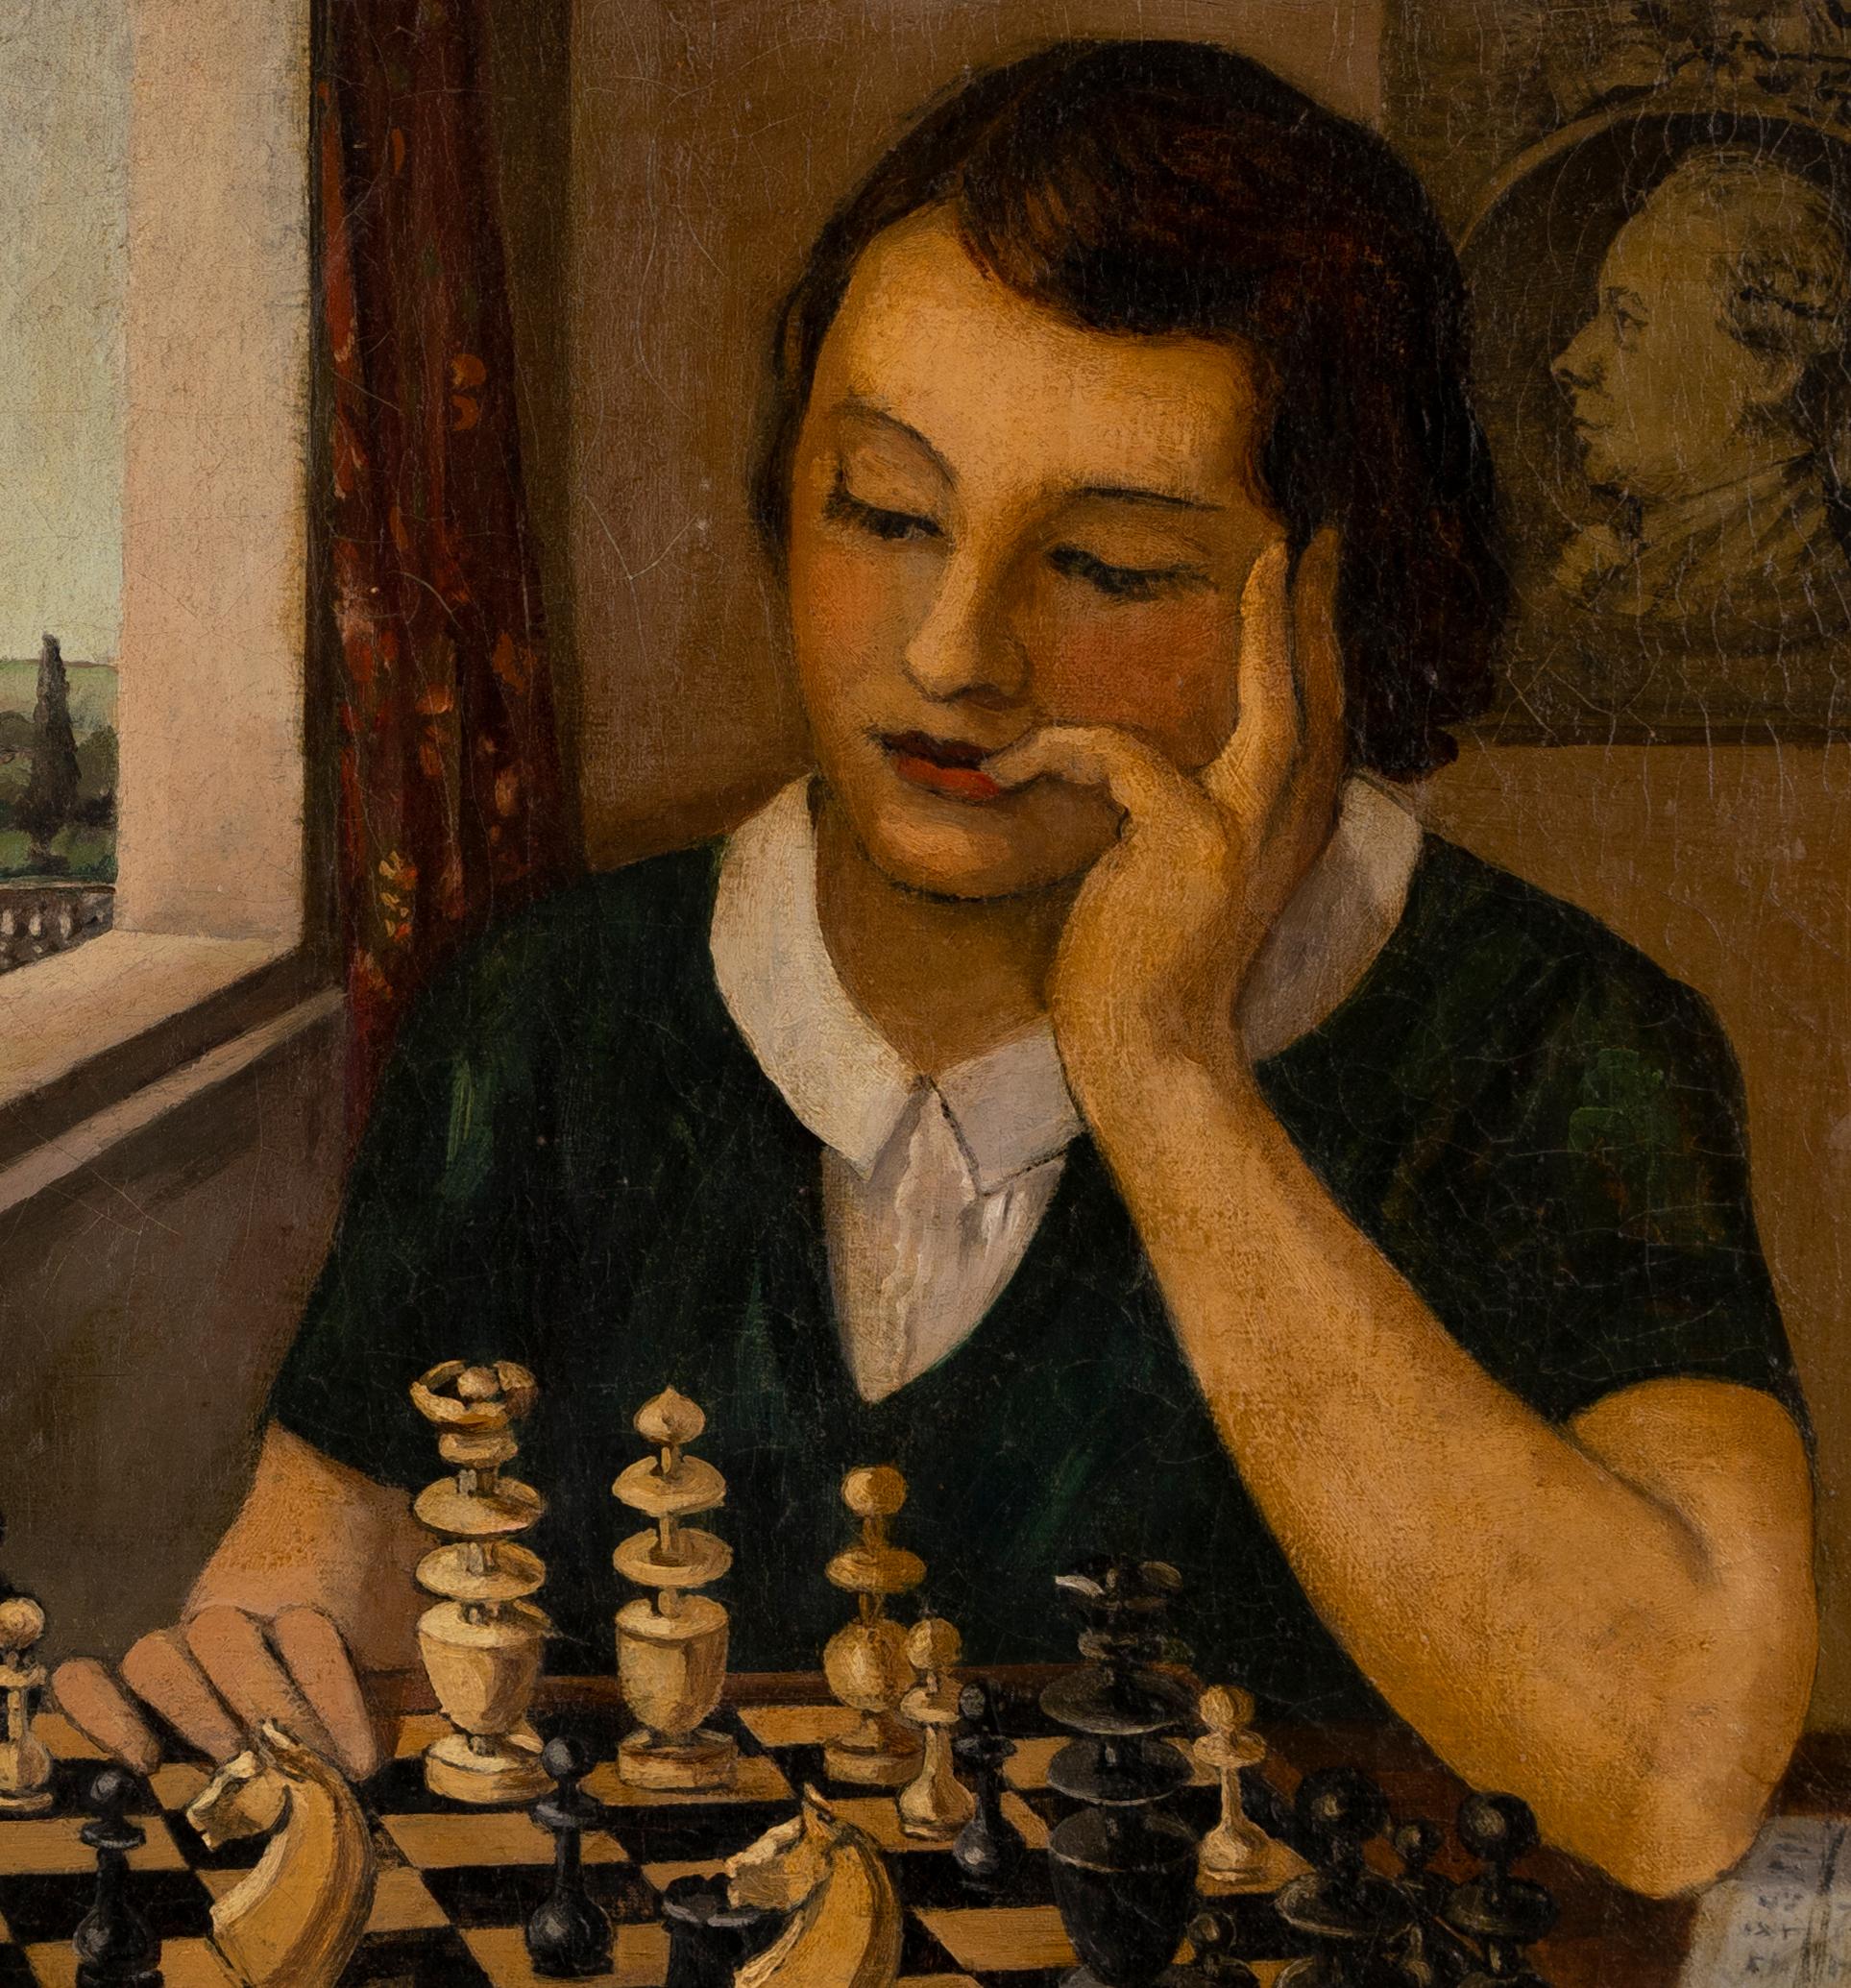 Antique original oil painting of a young woman playing chess.  Oil on canvas, circa 1900.  Signed lower right.  Image size, 26L x 24H.  Housed in a modern frame.
